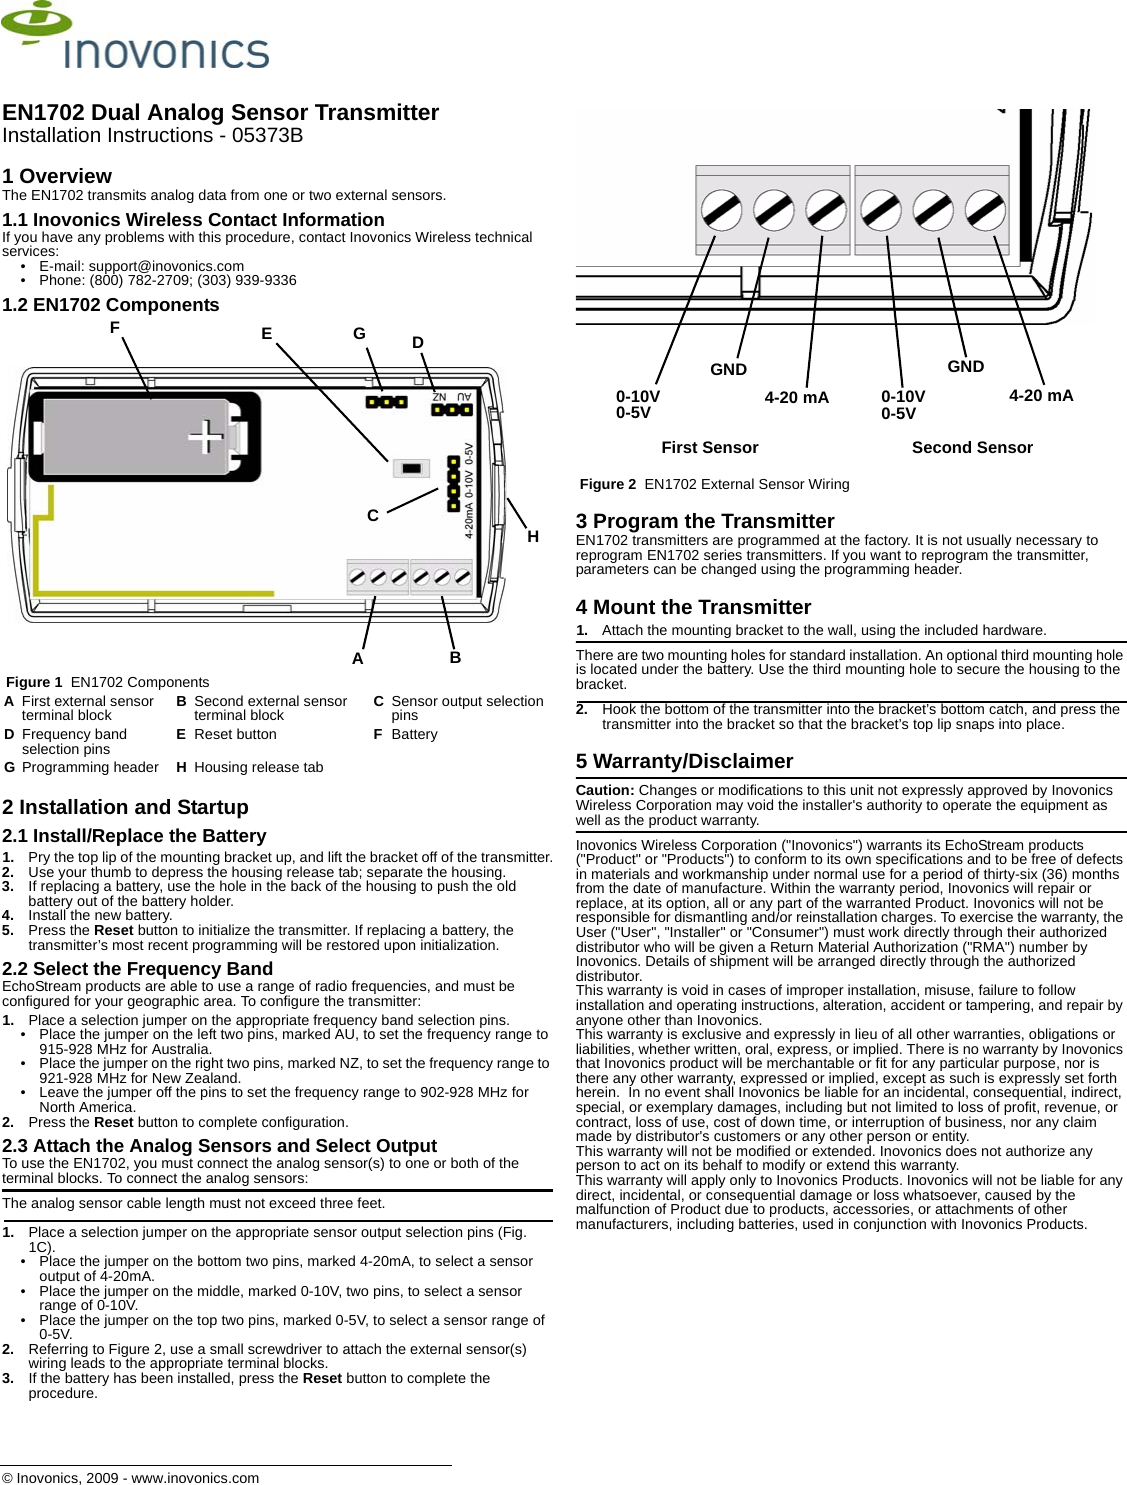 © Inovonics, 2009 - www.inovonics.comEN1702 Dual Analog Sensor TransmitterInstallation Instructions - 05373B1 OverviewThe EN1702 transmits analog data from one or two external sensors.1.1 Inovonics Wireless Contact InformationIf you have any problems with this procedure, contact Inovonics Wireless technical services:• E-mail: support@inovonics.com• Phone: (800) 782-2709; (303) 939-93361.2 EN1702 Components Figure 1  EN1702 Components2 Installation and Startup2.1 Install/Replace the Battery1. Pry the top lip of the mounting bracket up, and lift the bracket off of the transmitter.2. Use your thumb to depress the housing release tab; separate the housing.3. If replacing a battery, use the hole in the back of the housing to push the old battery out of the battery holder.4. Install the new battery.5. Press the Reset button to initialize the transmitter. If replacing a battery, the transmitter’s most recent programming will be restored upon initialization.2.2 Select the Frequency BandEchoStream products are able to use a range of radio frequencies, and must be configured for your geographic area. To configure the transmitter:1. Place a selection jumper on the appropriate frequency band selection pins.• Place the jumper on the left two pins, marked AU, to set the frequency range to 915-928 MHz for Australia.• Place the jumper on the right two pins, marked NZ, to set the frequency range to 921-928 MHz for New Zealand.• Leave the jumper off the pins to set the frequency range to 902-928 MHz for North America.2. Press the Reset button to complete configuration.2.3 Attach the Analog Sensors and Select OutputTo use the EN1702, you must connect the analog sensor(s) to one or both of the terminal blocks. To connect the analog sensors:The analog sensor cable length must not exceed three feet.1. Place a selection jumper on the appropriate sensor output selection pins (Fig. 1C).• Place the jumper on the bottom two pins, marked 4-20mA, to select a sensor output of 4-20mA.• Place the jumper on the middle, marked 0-10V, two pins, to select a sensor range of 0-10V.• Place the jumper on the top two pins, marked 0-5V, to select a sensor range of 0-5V.2. Referring to Figure 2, use a small screwdriver to attach the external sensor(s) wiring leads to the appropriate terminal blocks.3. If the battery has been installed, press the Reset button to complete the procedure. Figure 2  EN1702 External Sensor Wiring3 Program the TransmitterEN1702 transmitters are programmed at the factory. It is not usually necessary to reprogram EN1702 series transmitters. If you want to reprogram the transmitter, parameters can be changed using the programming header.4 Mount the Transmitter1. Attach the mounting bracket to the wall, using the included hardware.There are two mounting holes for standard installation. An optional third mounting hole is located under the battery. Use the third mounting hole to secure the housing to the bracket.2. Hook the bottom of the transmitter into the bracket’s bottom catch, and press the transmitter into the bracket so that the bracket’s top lip snaps into place.5 Warranty/DisclaimerCaution: Changes or modifications to this unit not expressly approved by Inovonics Wireless Corporation may void the installer&apos;s authority to operate the equipment as well as the product warranty.Inovonics Wireless Corporation (&quot;Inovonics&quot;) warrants its EchoStream products (&quot;Product&quot; or &quot;Products&quot;) to conform to its own specifications and to be free of defects in materials and workmanship under normal use for a period of thirty-six (36) months from the date of manufacture. Within the warranty period, Inovonics will repair or replace, at its option, all or any part of the warranted Product. Inovonics will not be responsible for dismantling and/or reinstallation charges. To exercise the warranty, the User (&quot;User&quot;, &quot;Installer&quot; or &quot;Consumer&quot;) must work directly through their authorized distributor who will be given a Return Material Authorization (&quot;RMA&quot;) number by Inovonics. Details of shipment will be arranged directly through the authorized distributor.This warranty is void in cases of improper installation, misuse, failure to follow installation and operating instructions, alteration, accident or tampering, and repair by anyone other than Inovonics.This warranty is exclusive and expressly in lieu of all other warranties, obligations or liabilities, whether written, oral, express, or implied. There is no warranty by Inovonics that Inovonics product will be merchantable or fit for any particular purpose, nor is there any other warranty, expressed or implied, except as such is expressly set forth herein.  In no event shall Inovonics be liable for an incidental, consequential, indirect, special, or exemplary damages, including but not limited to loss of profit, revenue, or contract, loss of use, cost of down time, or interruption of business, nor any claim made by distributor&apos;s customers or any other person or entity.This warranty will not be modified or extended. Inovonics does not authorize any person to act on its behalf to modify or extend this warranty.This warranty will apply only to Inovonics Products. Inovonics will not be liable for any direct, incidental, or consequential damage or loss whatsoever, caused by the malfunction of Product due to products, accessories, or attachments of other manufacturers, including batteries, used in conjunction with Inovonics Products.AFirst external sensor terminal block BSecond external sensor terminal block CSensor output selection pinsDFrequency band selection pins EReset button FBatteryGProgramming header HHousing release tabABEDFCGH4-20 mA 4-20 mA0-10V0-5V 0-10V0-5VGND GNDFirst Sensor Second Sensor